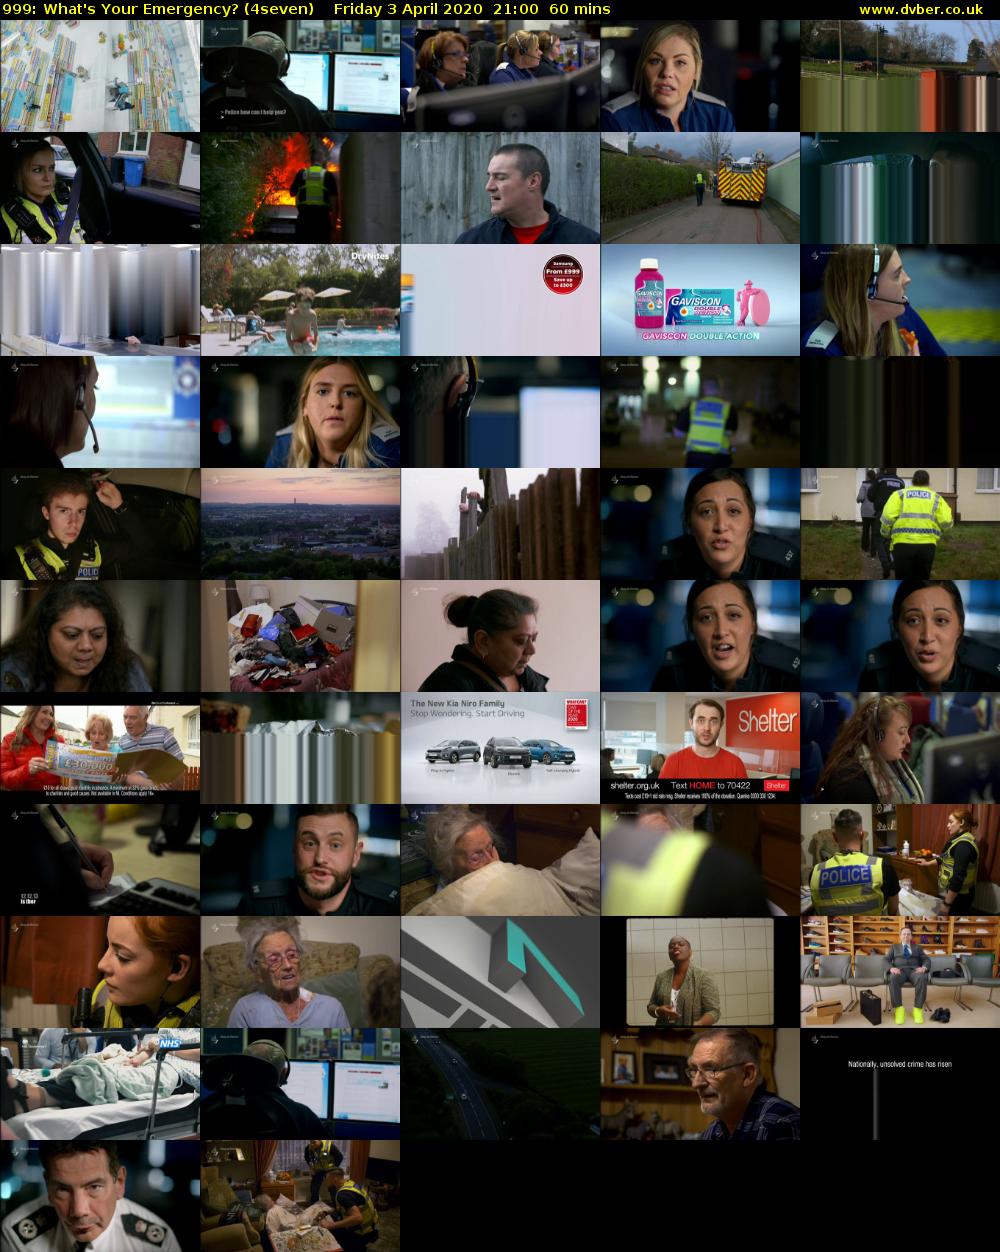 999: What's Your Emergency? (4seven) Friday 3 April 2020 21:00 - 22:00